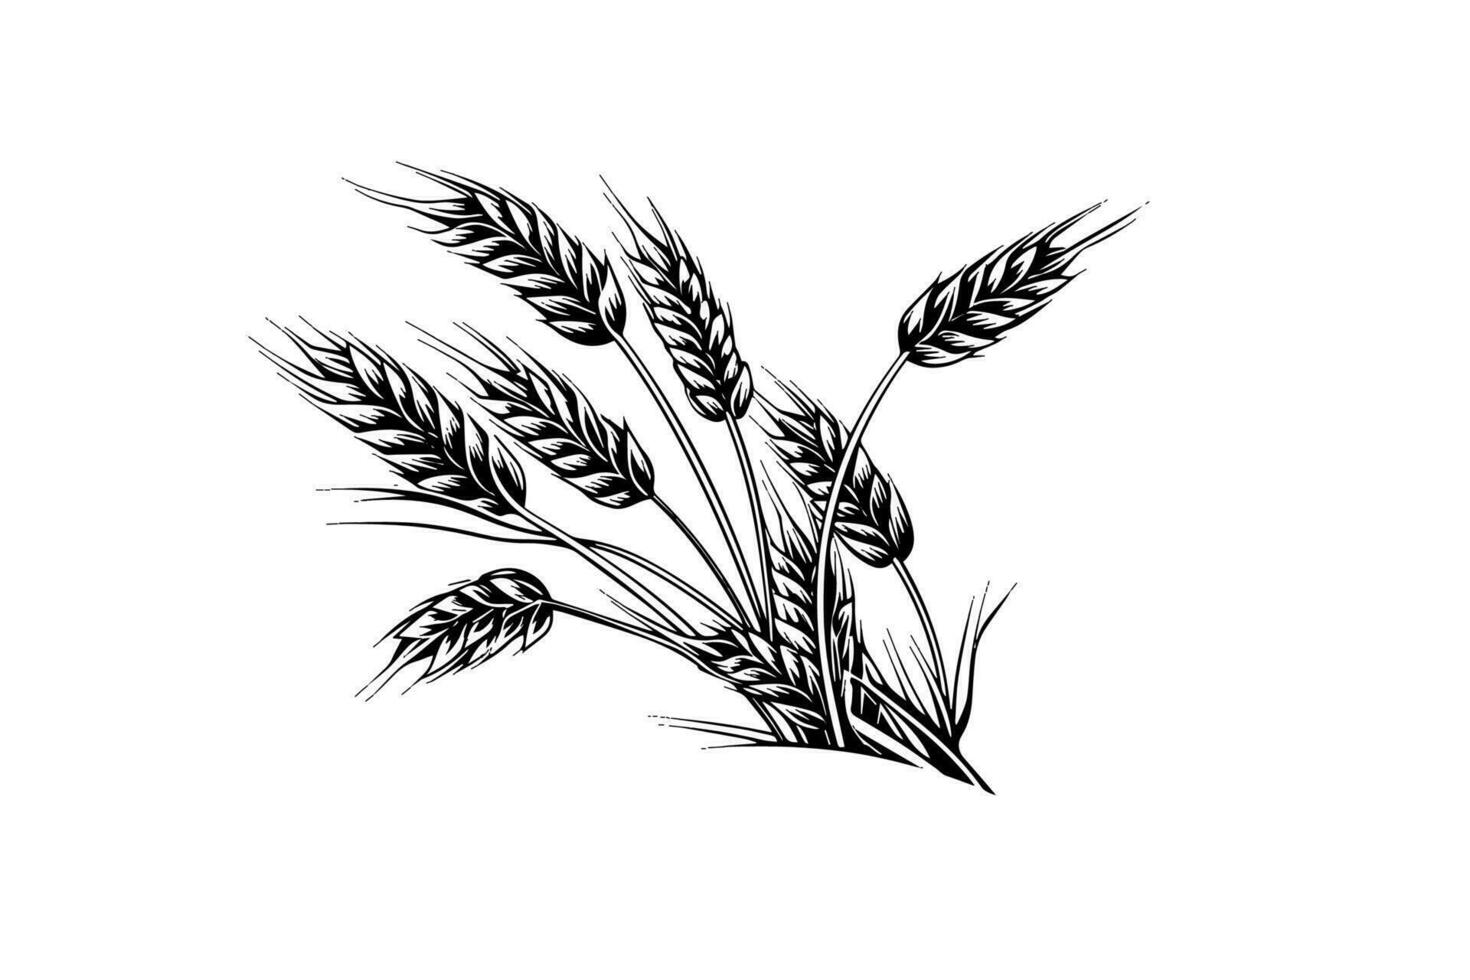 Wheat bread ears cereal crop sketch engraving style vector illustration.